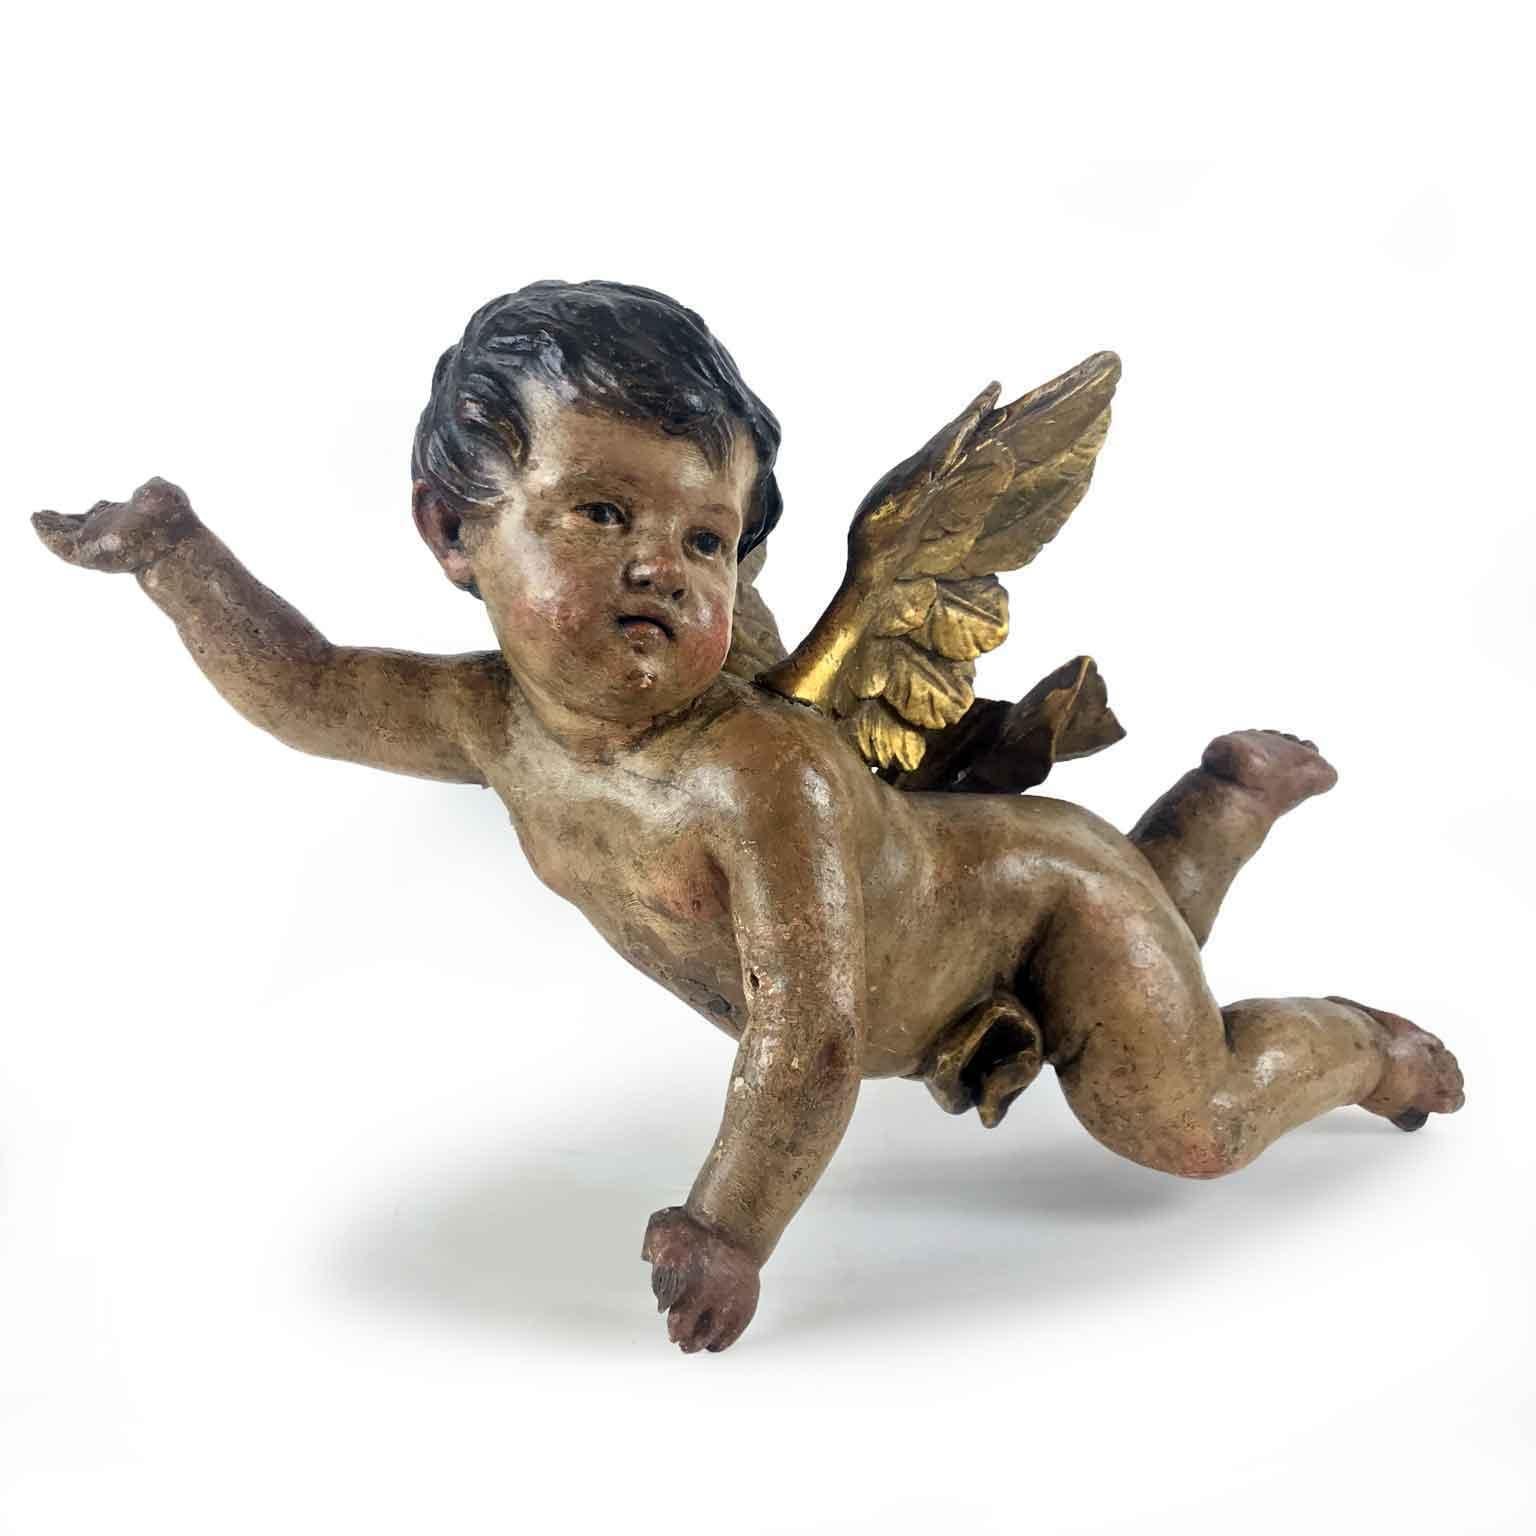 Lovely Baroque style announcing angel, an Italian figurative sculpture carved in cembran pinewood painted and giltwood of Italian origin, dating back to late 19th century, in fair condition.

This antique wall-hanging figure is a hand painted